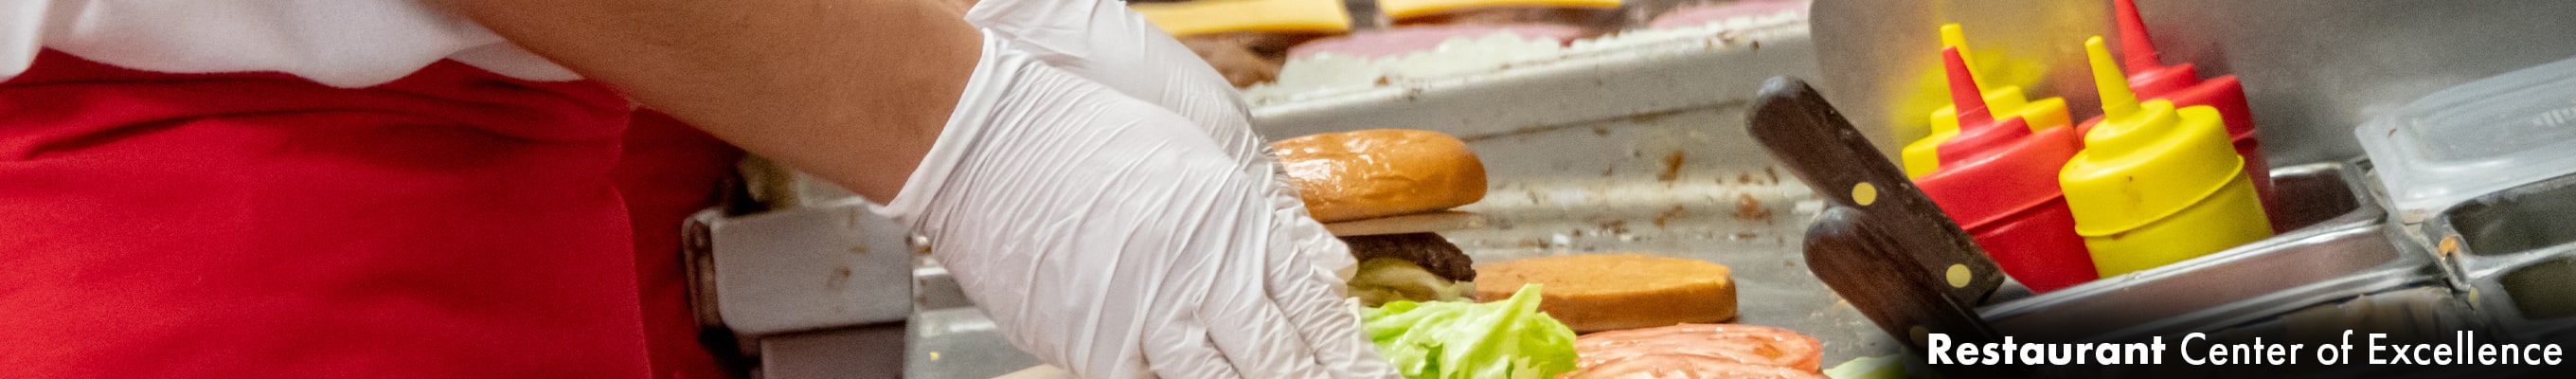 gloved hands preparing a hamburger, placing on toppings and placing the bun on top before serving